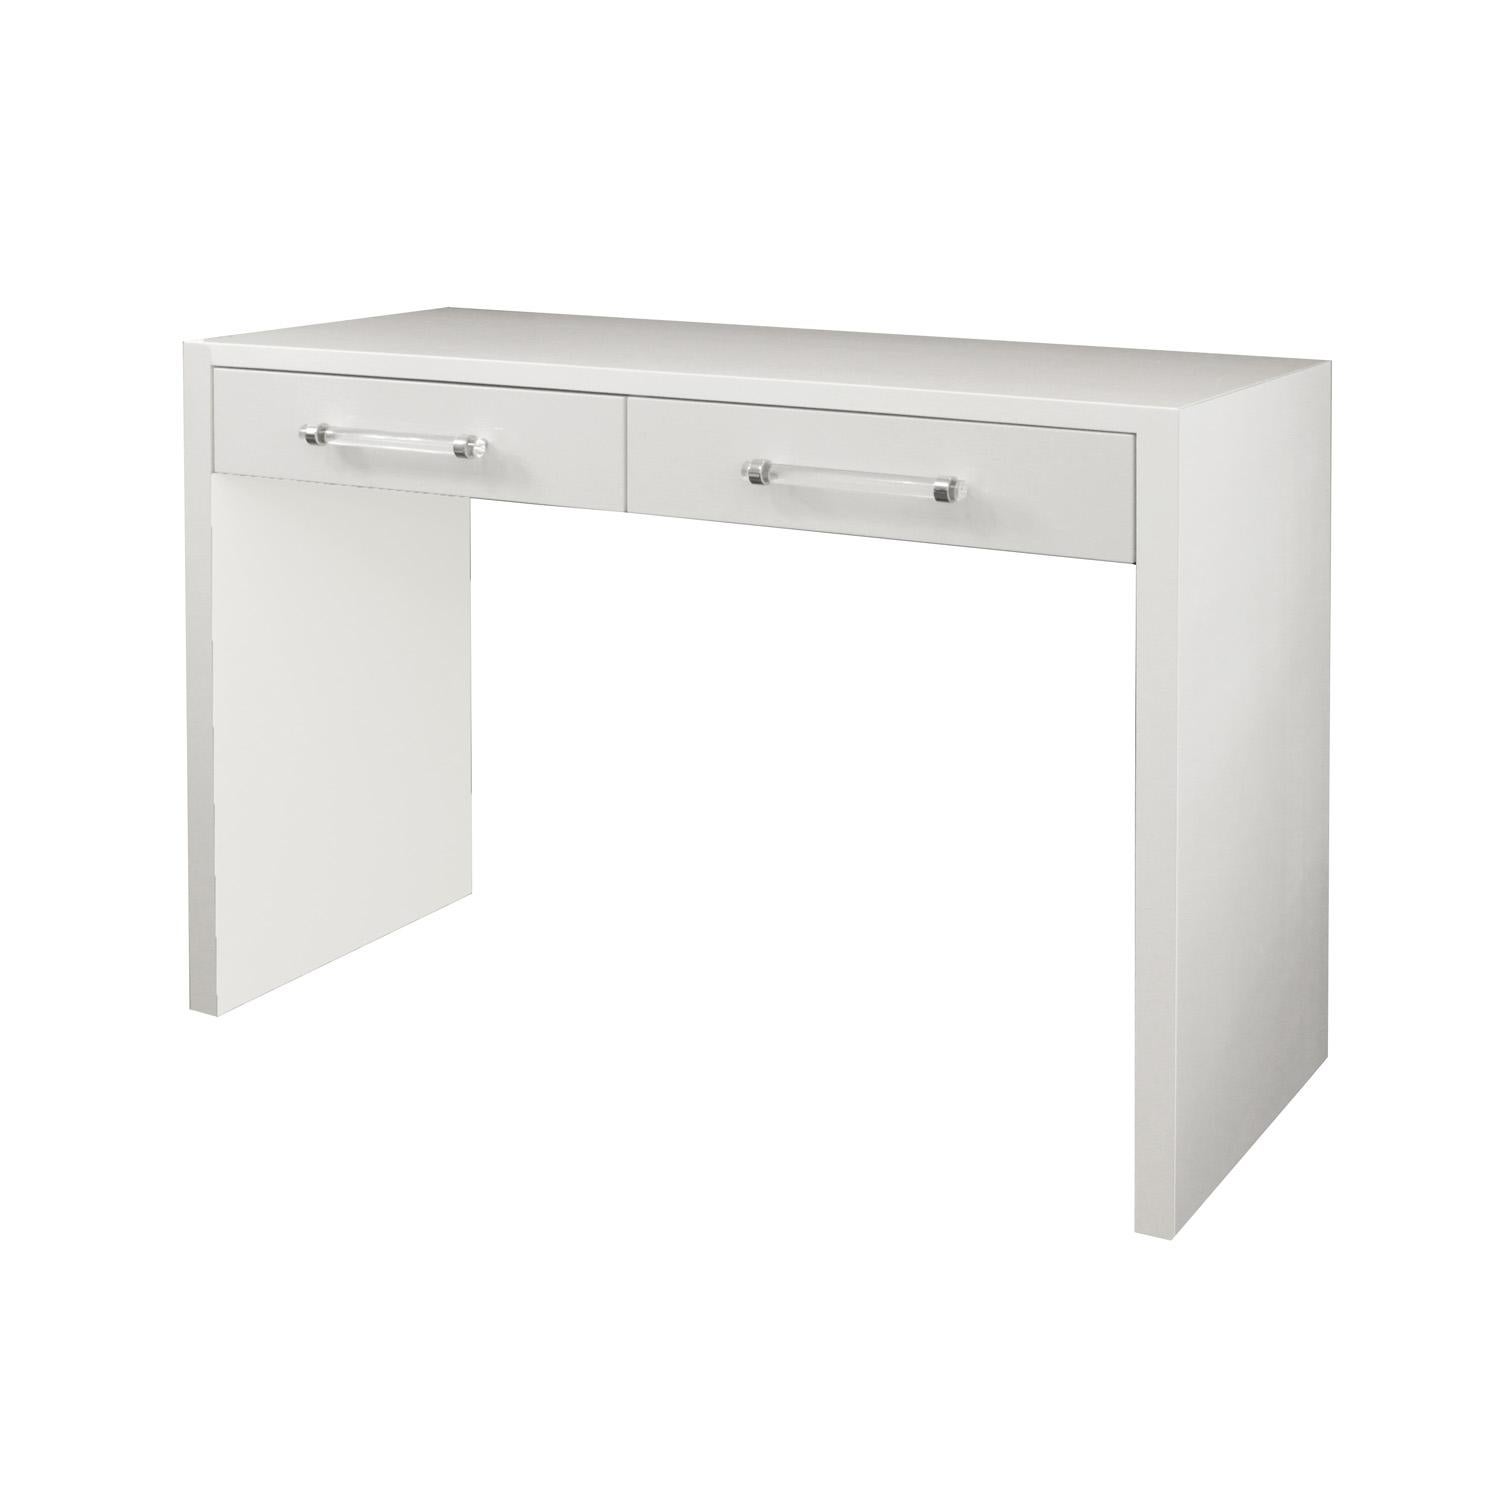 Petite custom, made to order, two drawer lacquered writing table with Lucite and chrome handles. Designed and made by Venfield. This item is made to order in your dimensions and color.